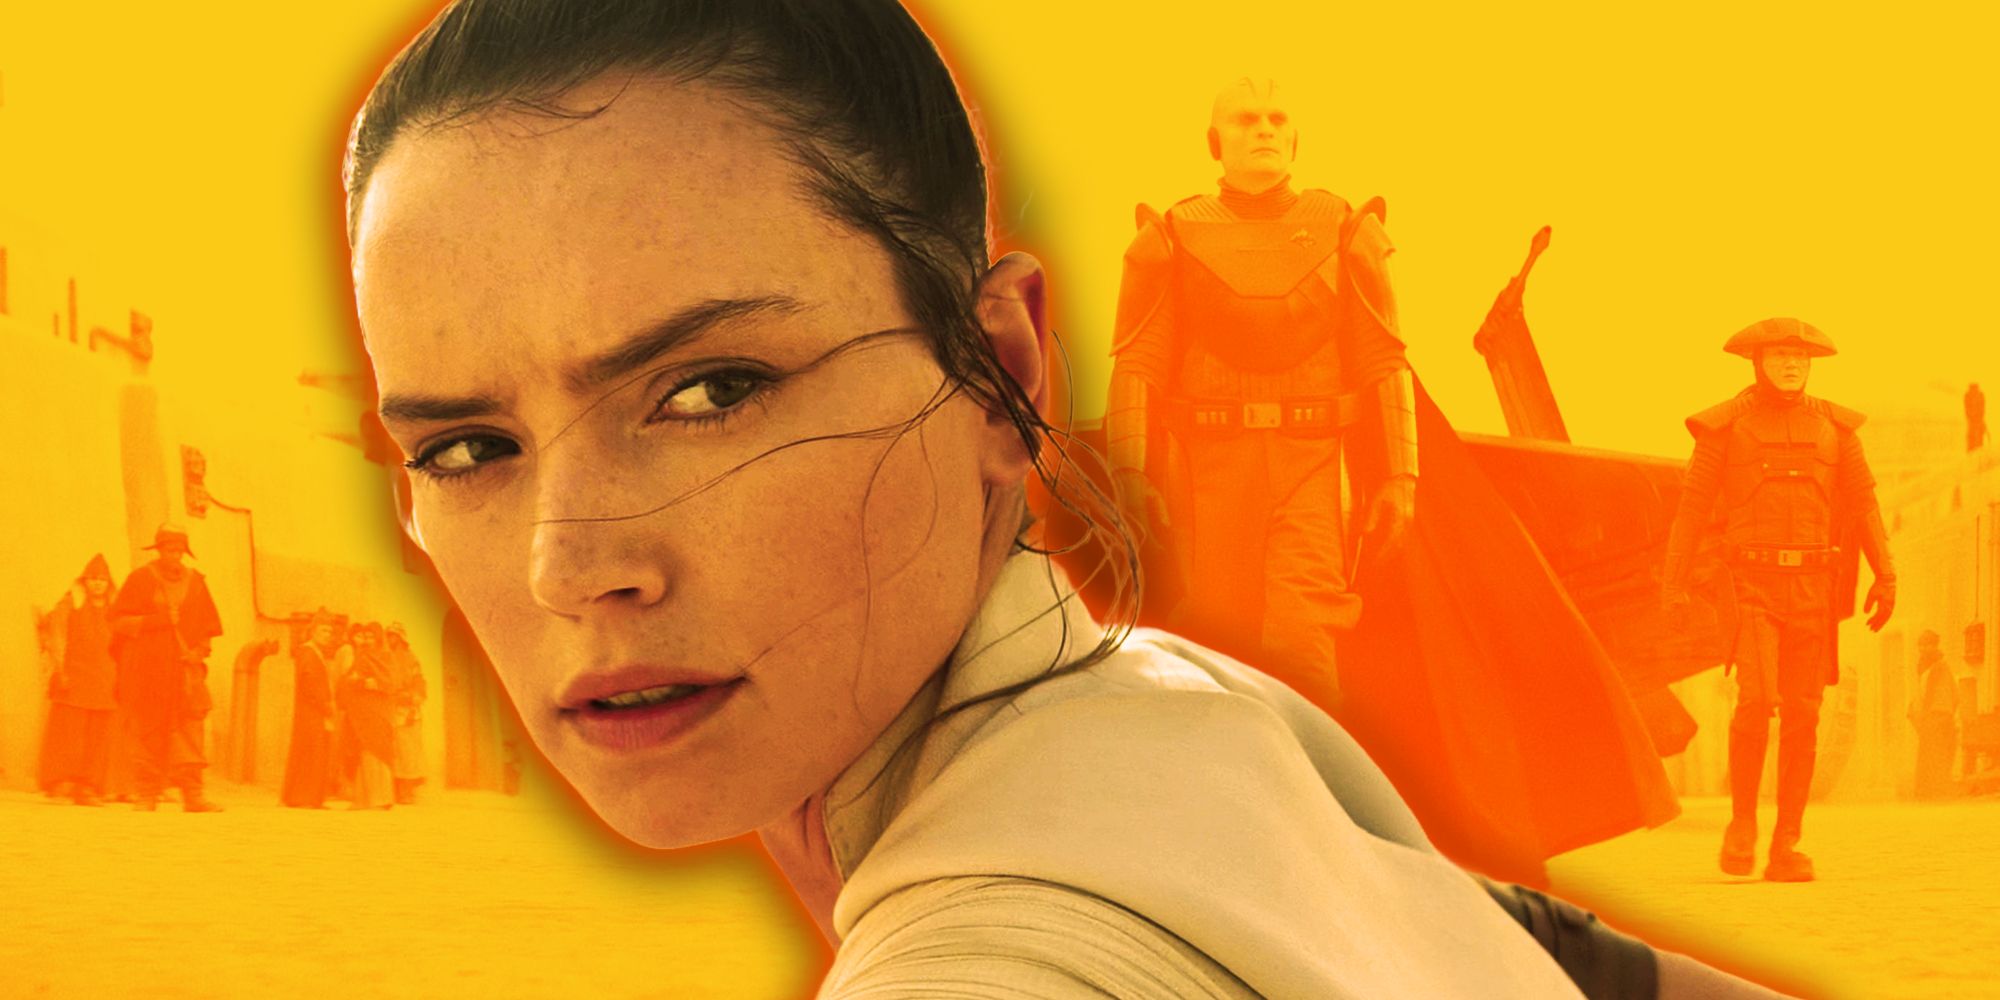 Daisy Ridley as Rey looking over her shoulder, with the Grand Inquisitor and his team in the background